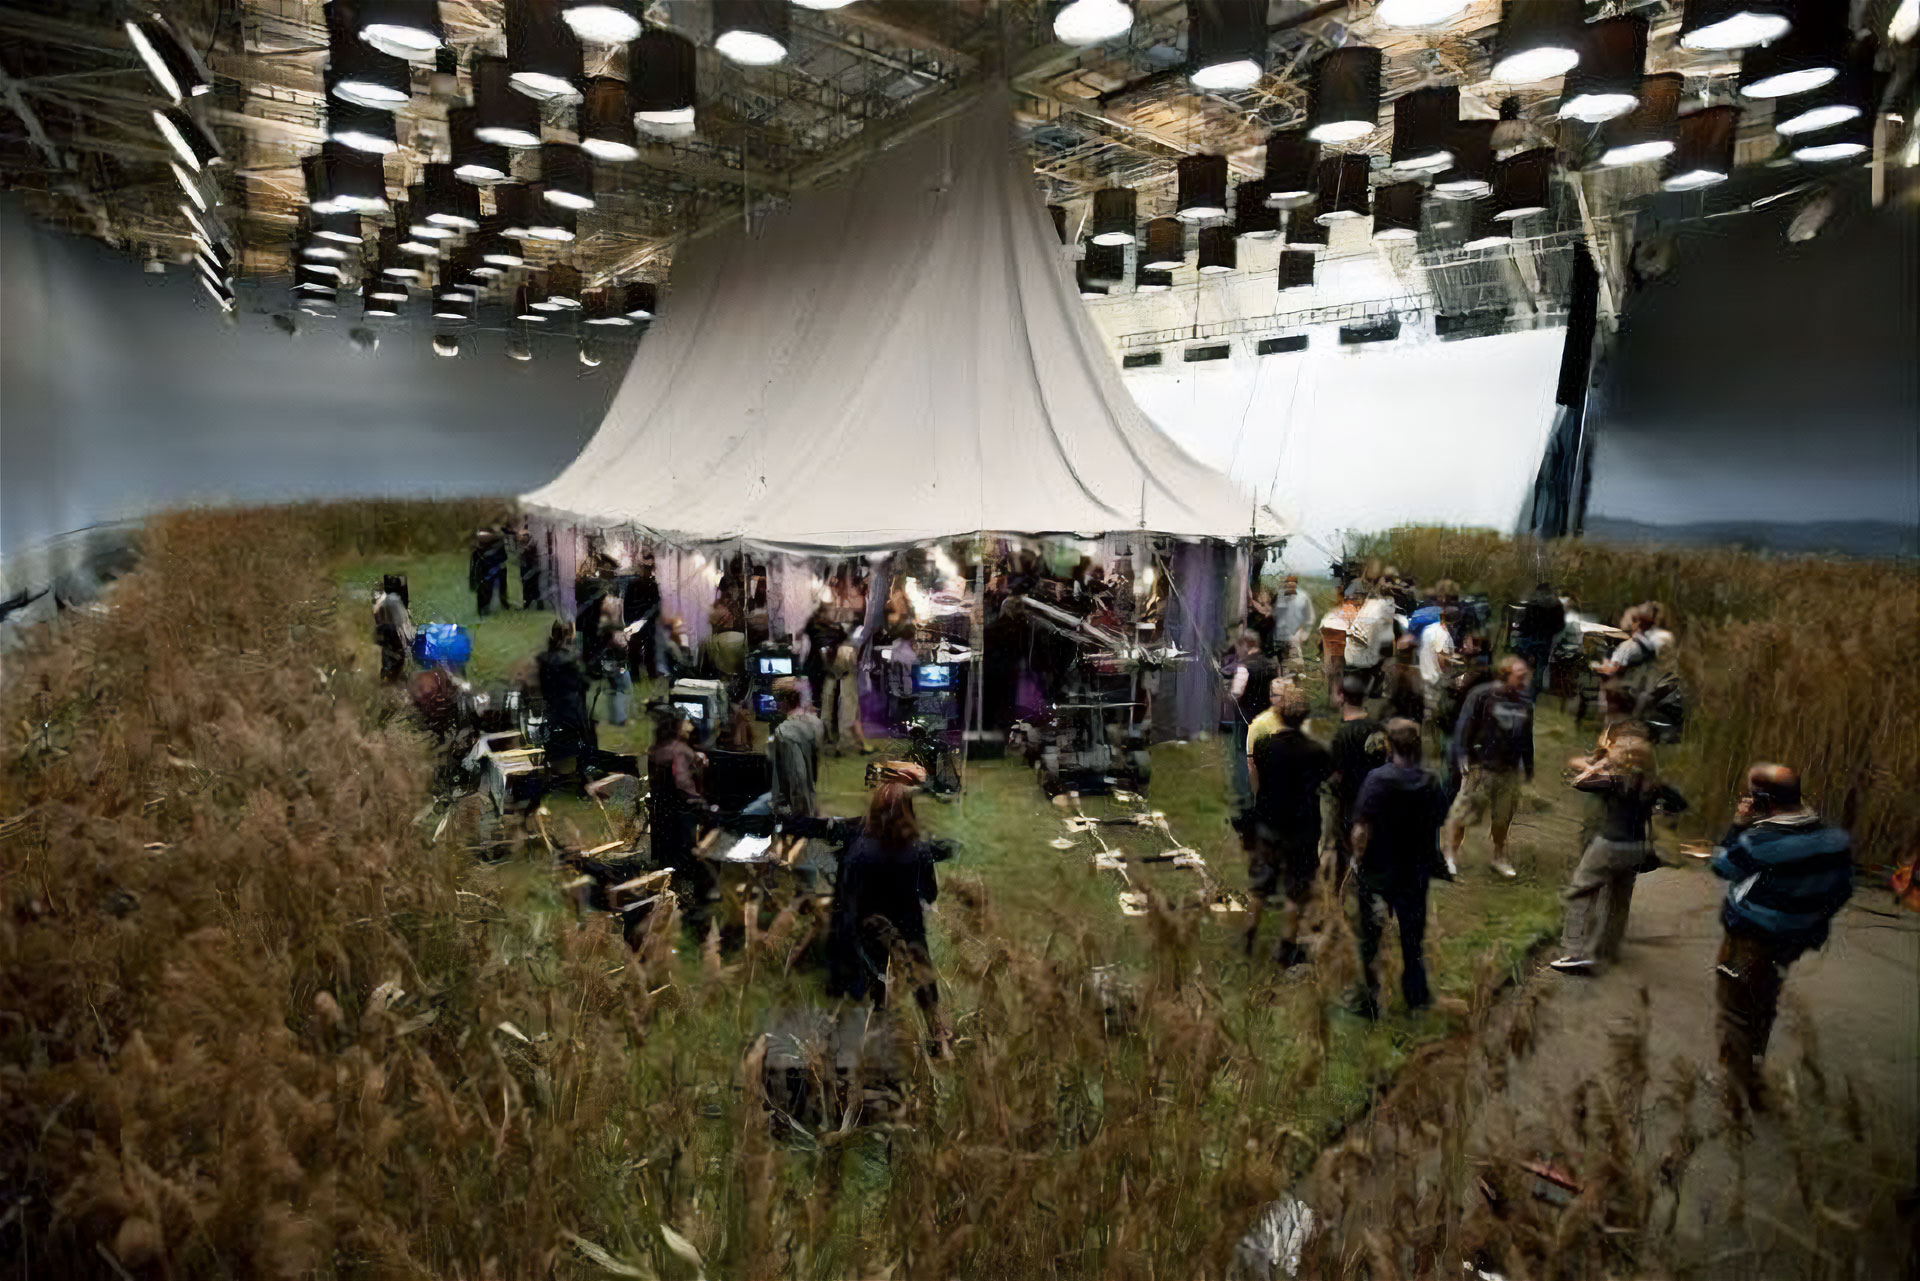 harry potter tent from deathly hallows behind the scenes